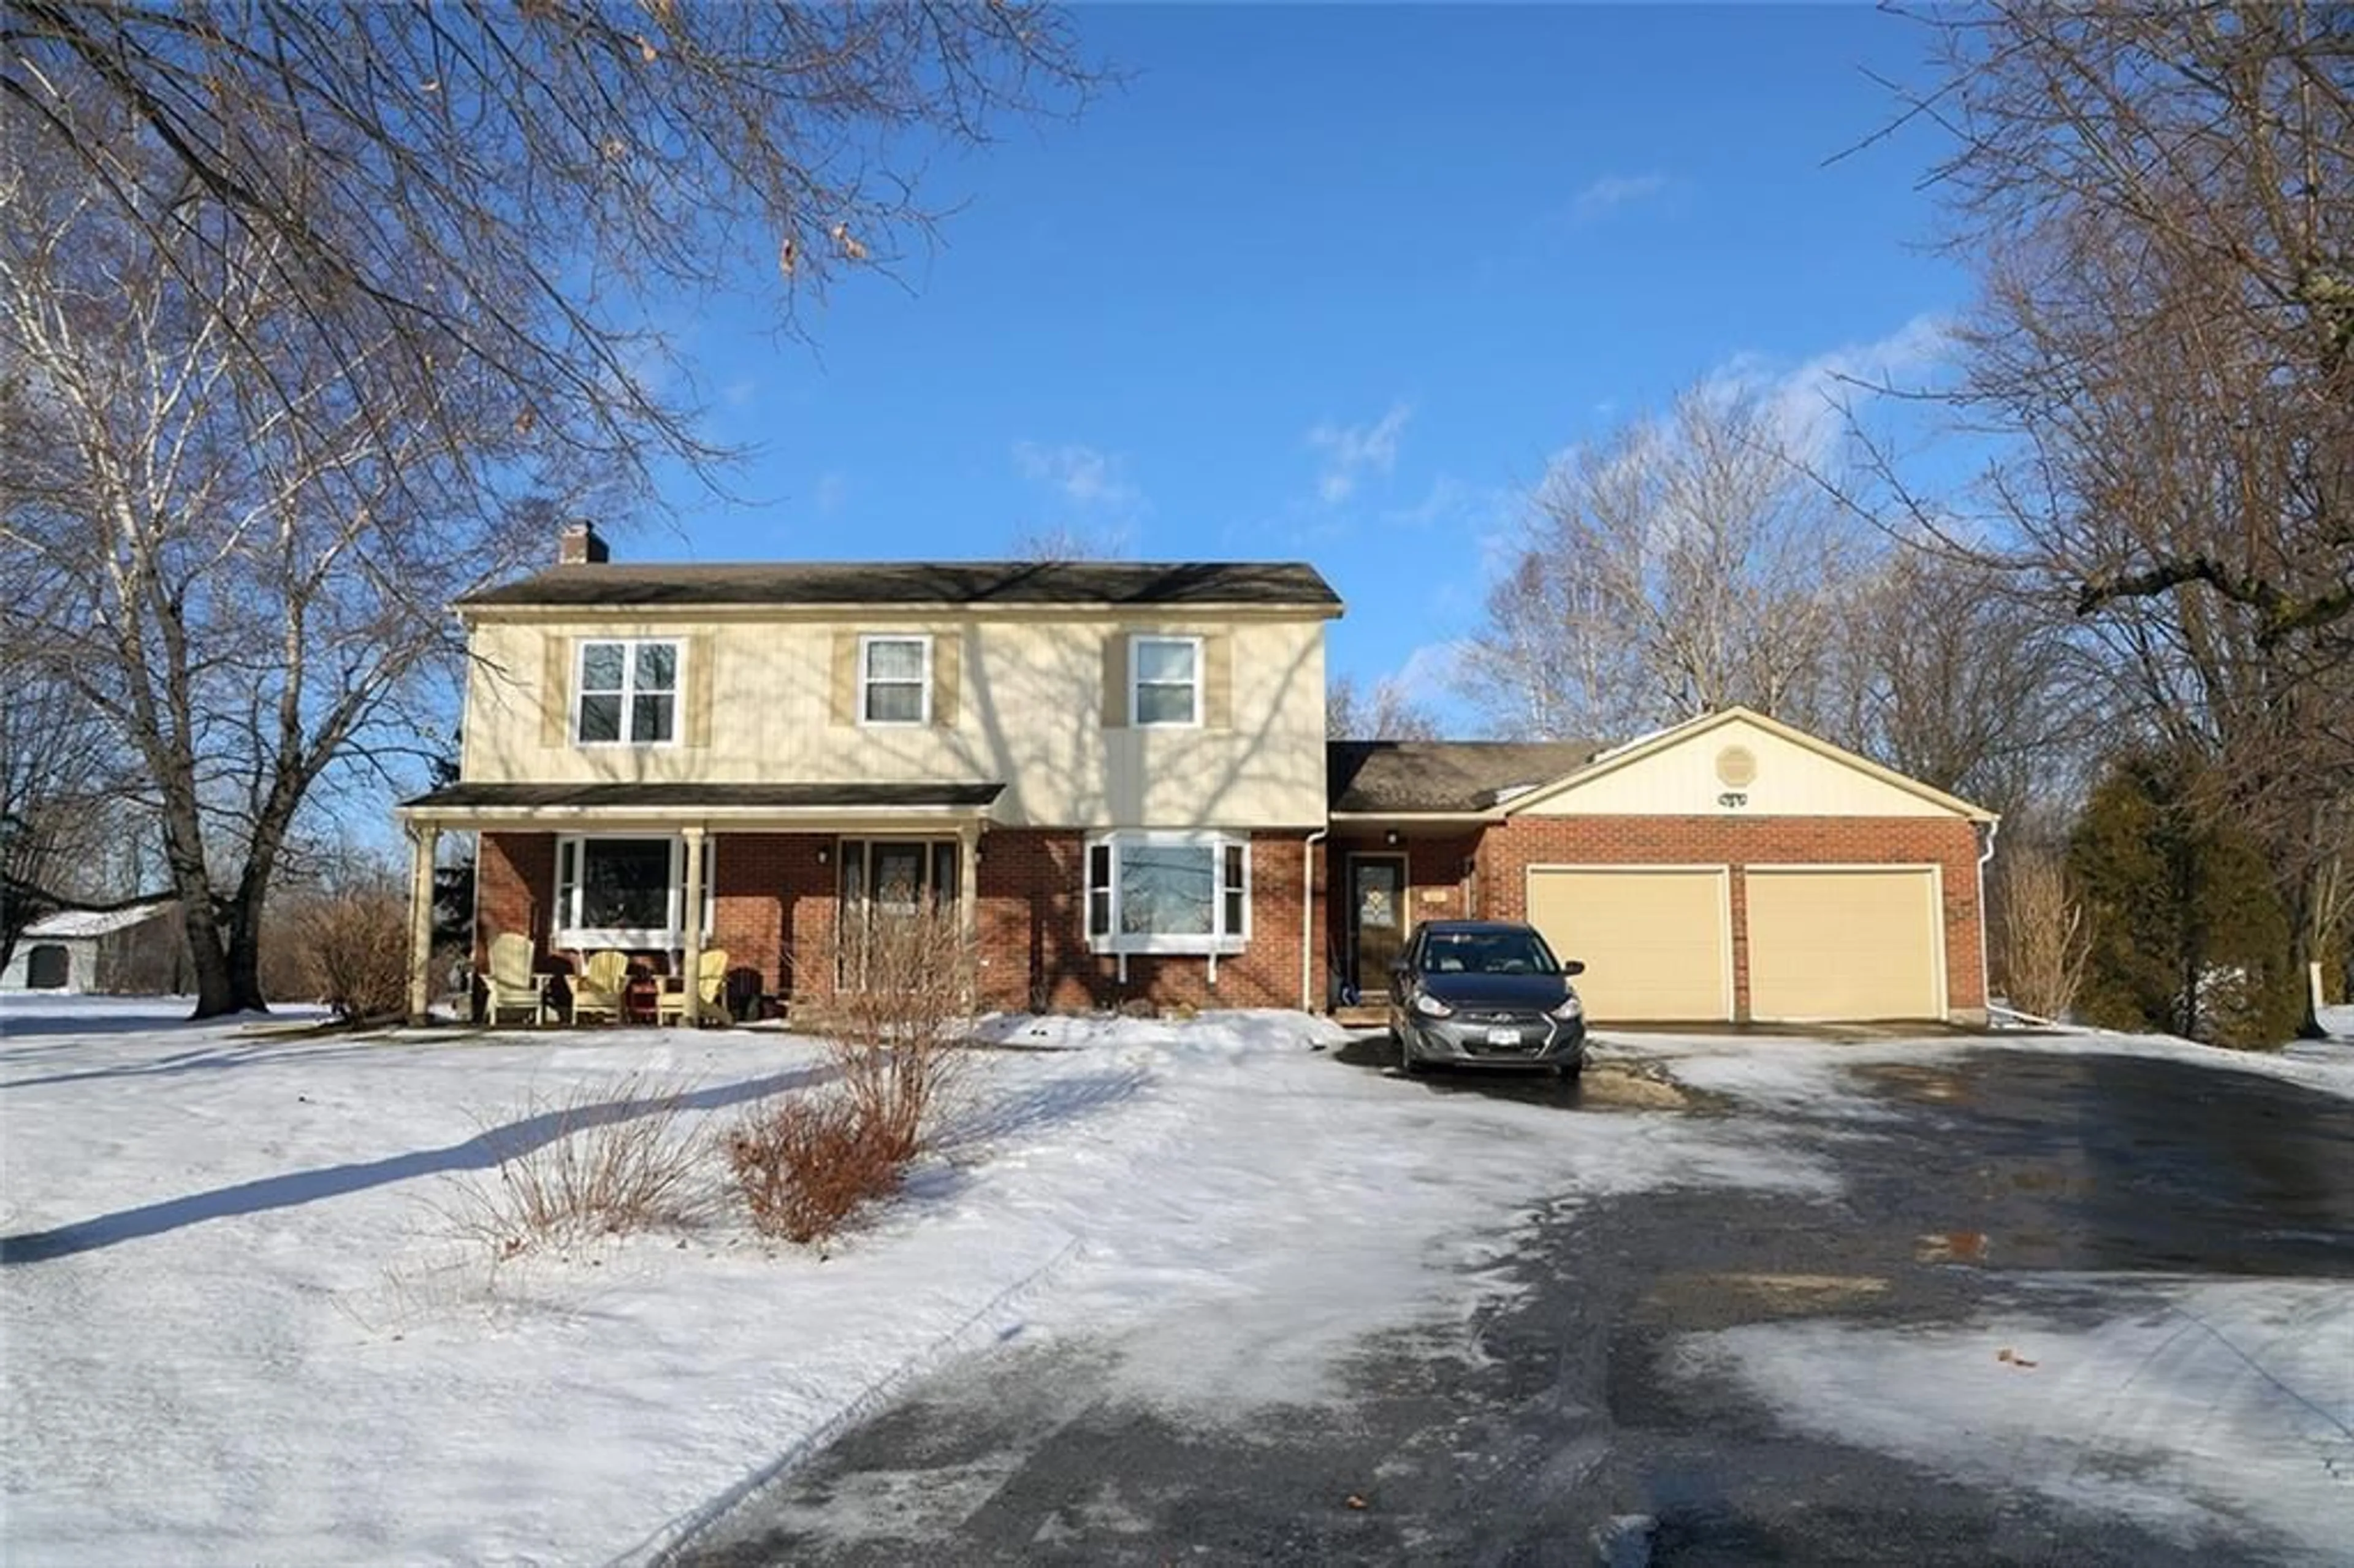 Frontside or backside of a home for 11561 LAKESHORE Dr, Iroquois Ontario K0E 1K0